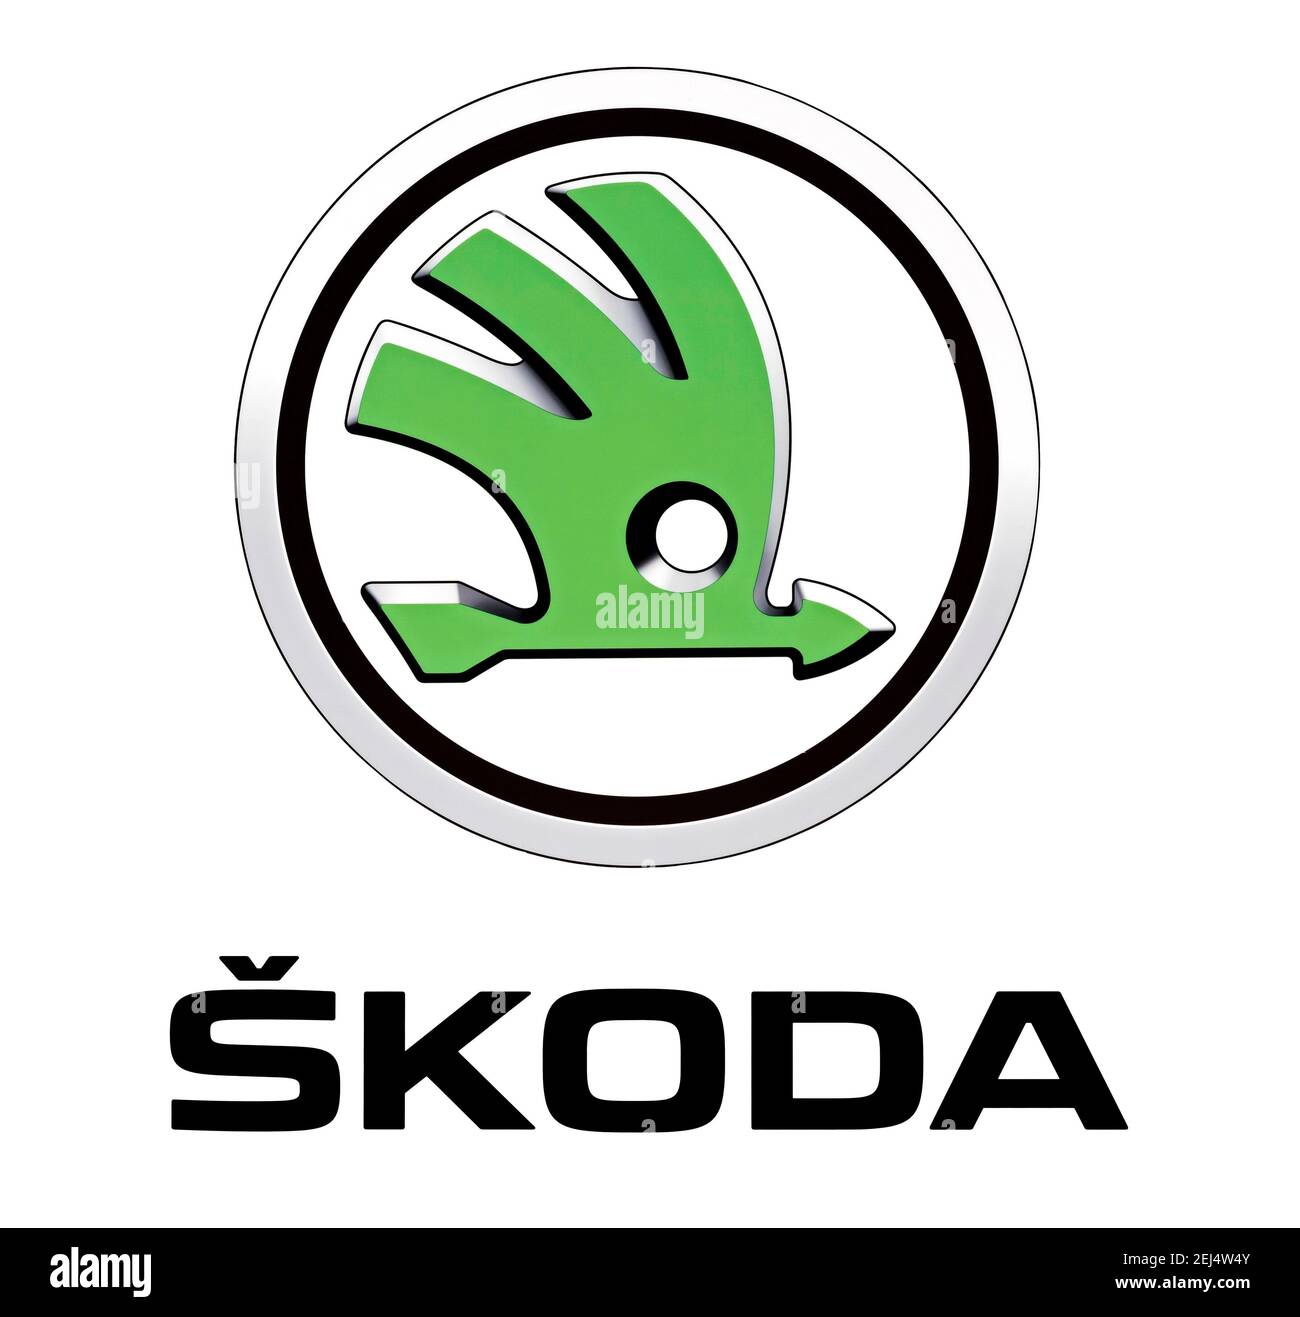 Skoda logo Cut Out Stock Images & Pictures - Alamy